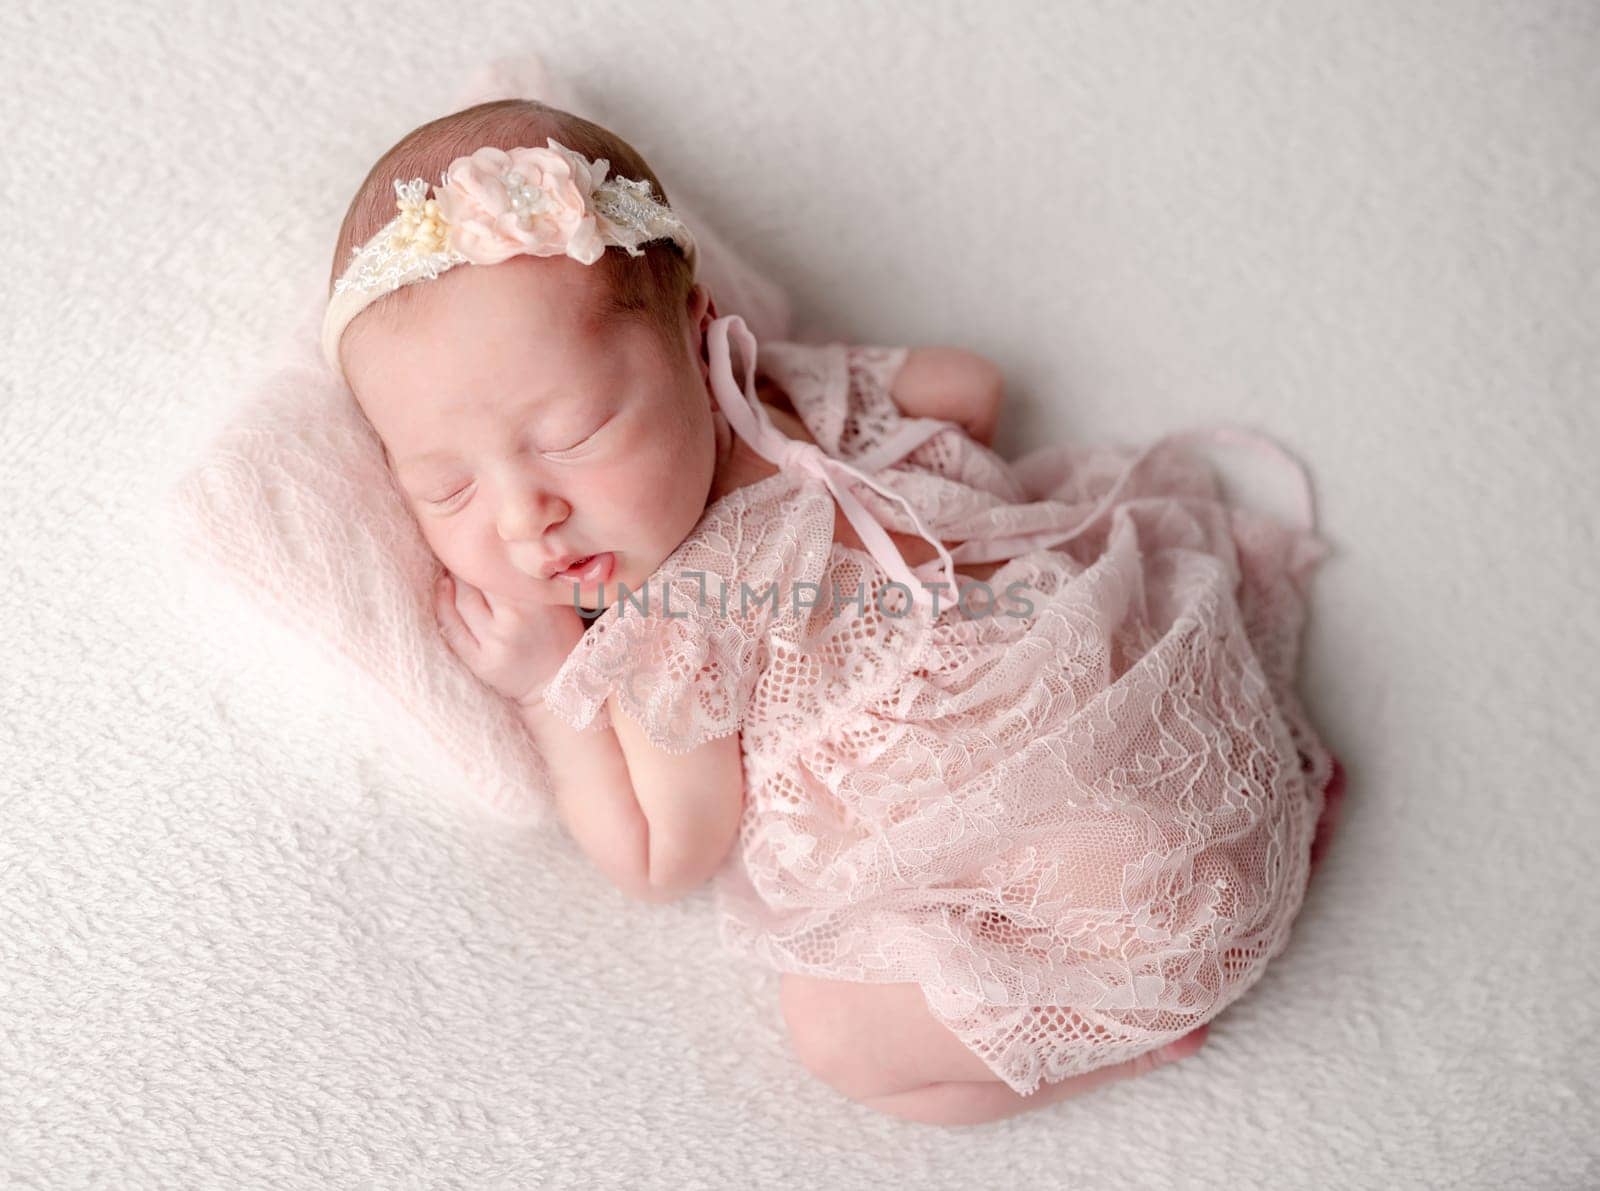 Newborn Girl In Pink Outfit Sleeps With Toy Cat by tan4ikk1